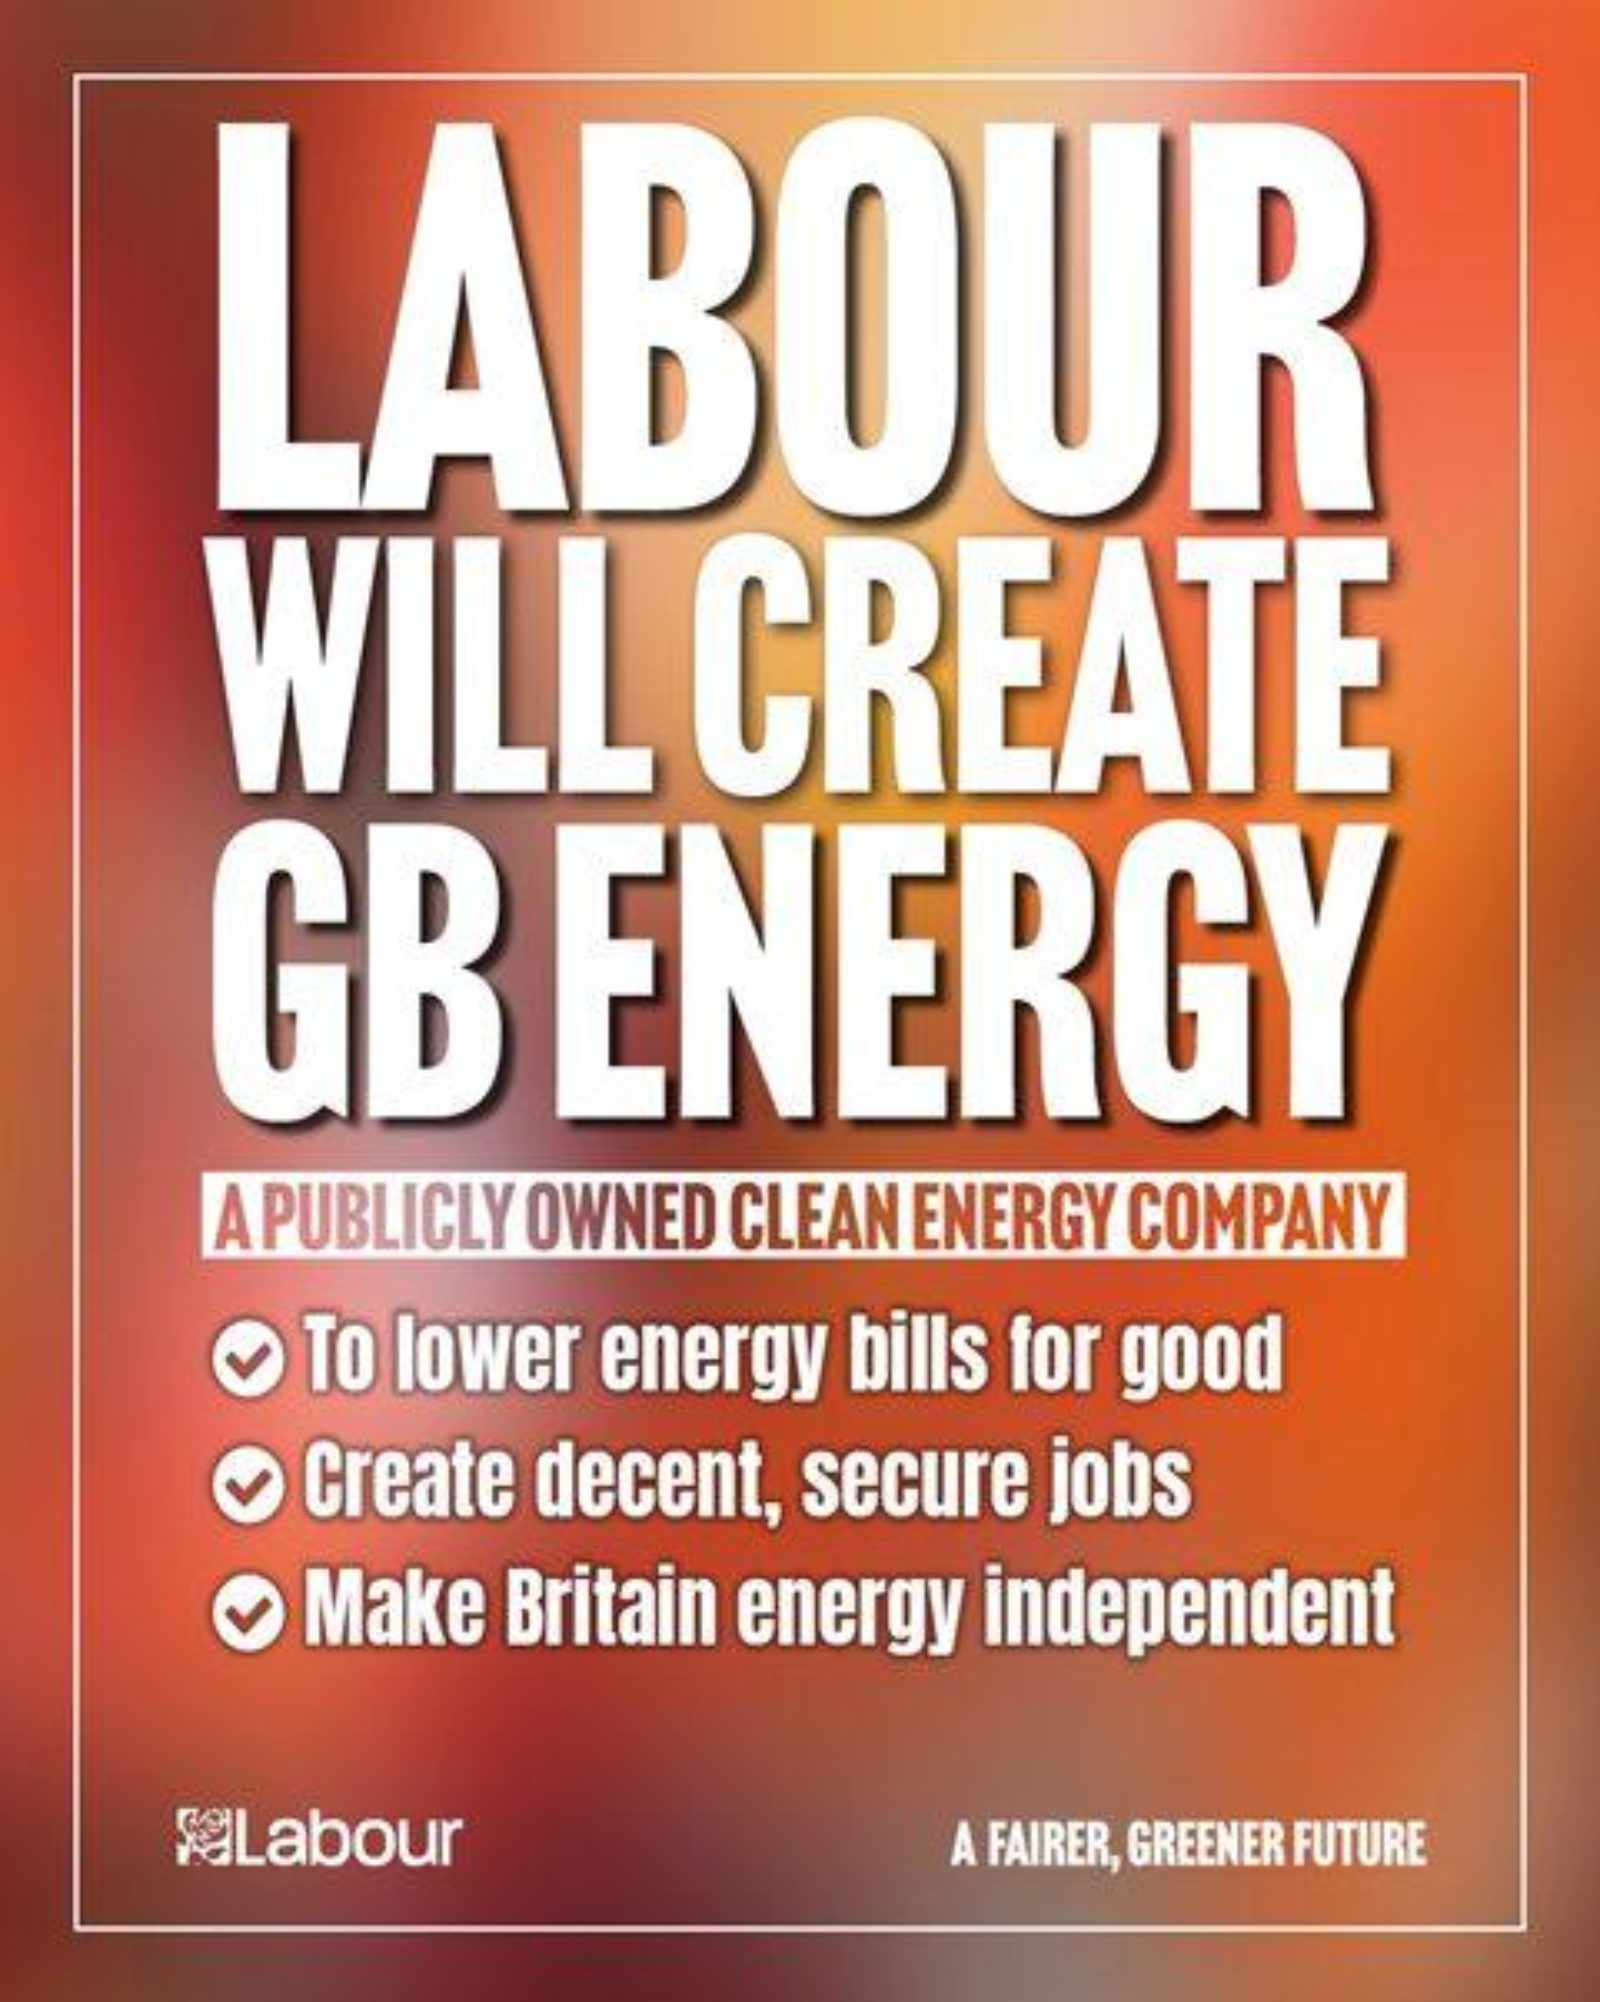 Labour will create GB Energy